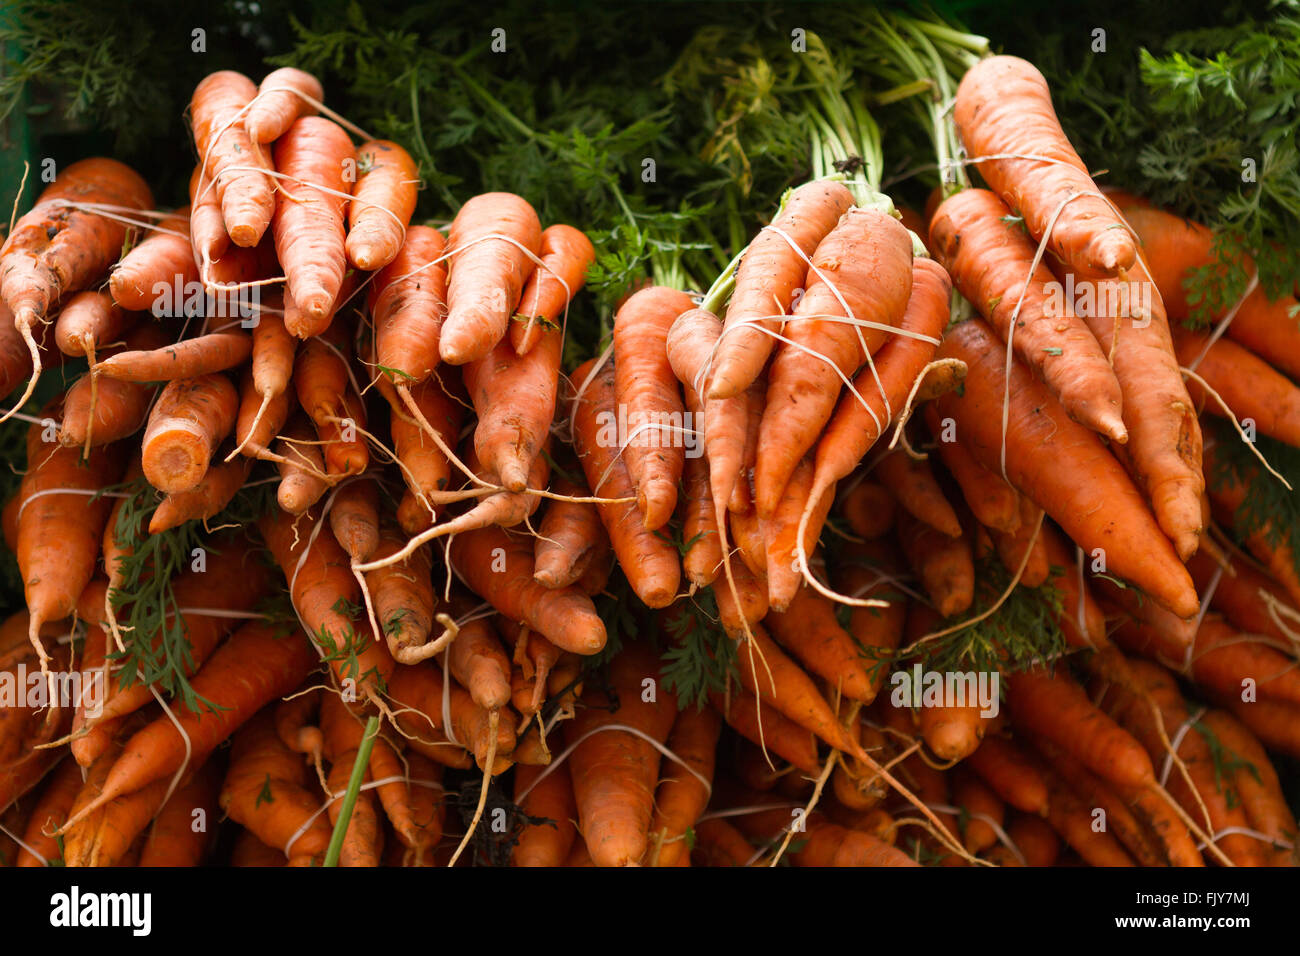 Freshly picked carrots stacked by bunches at farmers market Stock Photo